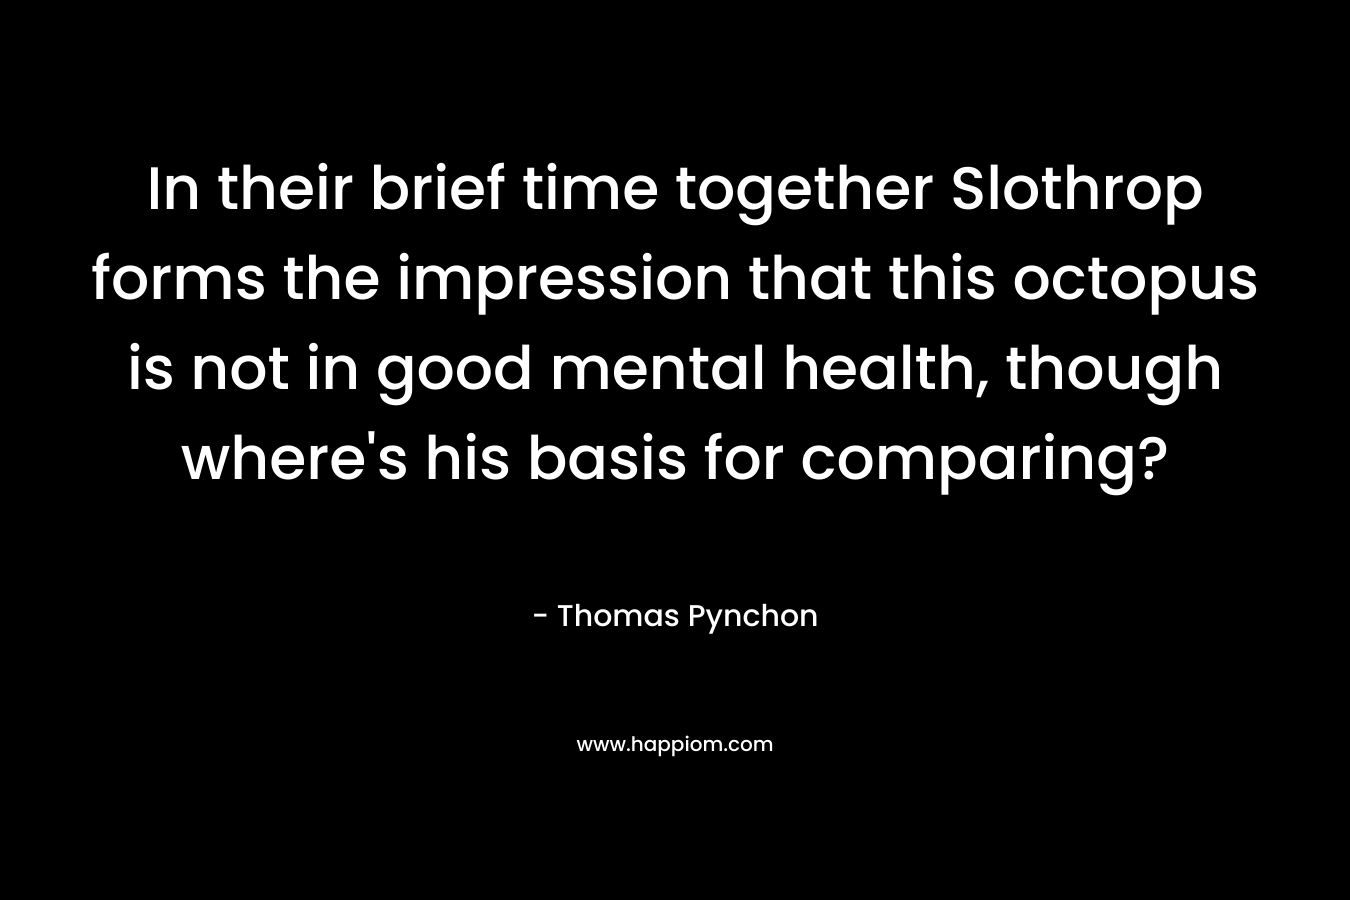 In their brief time together Slothrop forms the impression that this octopus is not in good mental health, though where’s his basis for comparing? – Thomas Pynchon